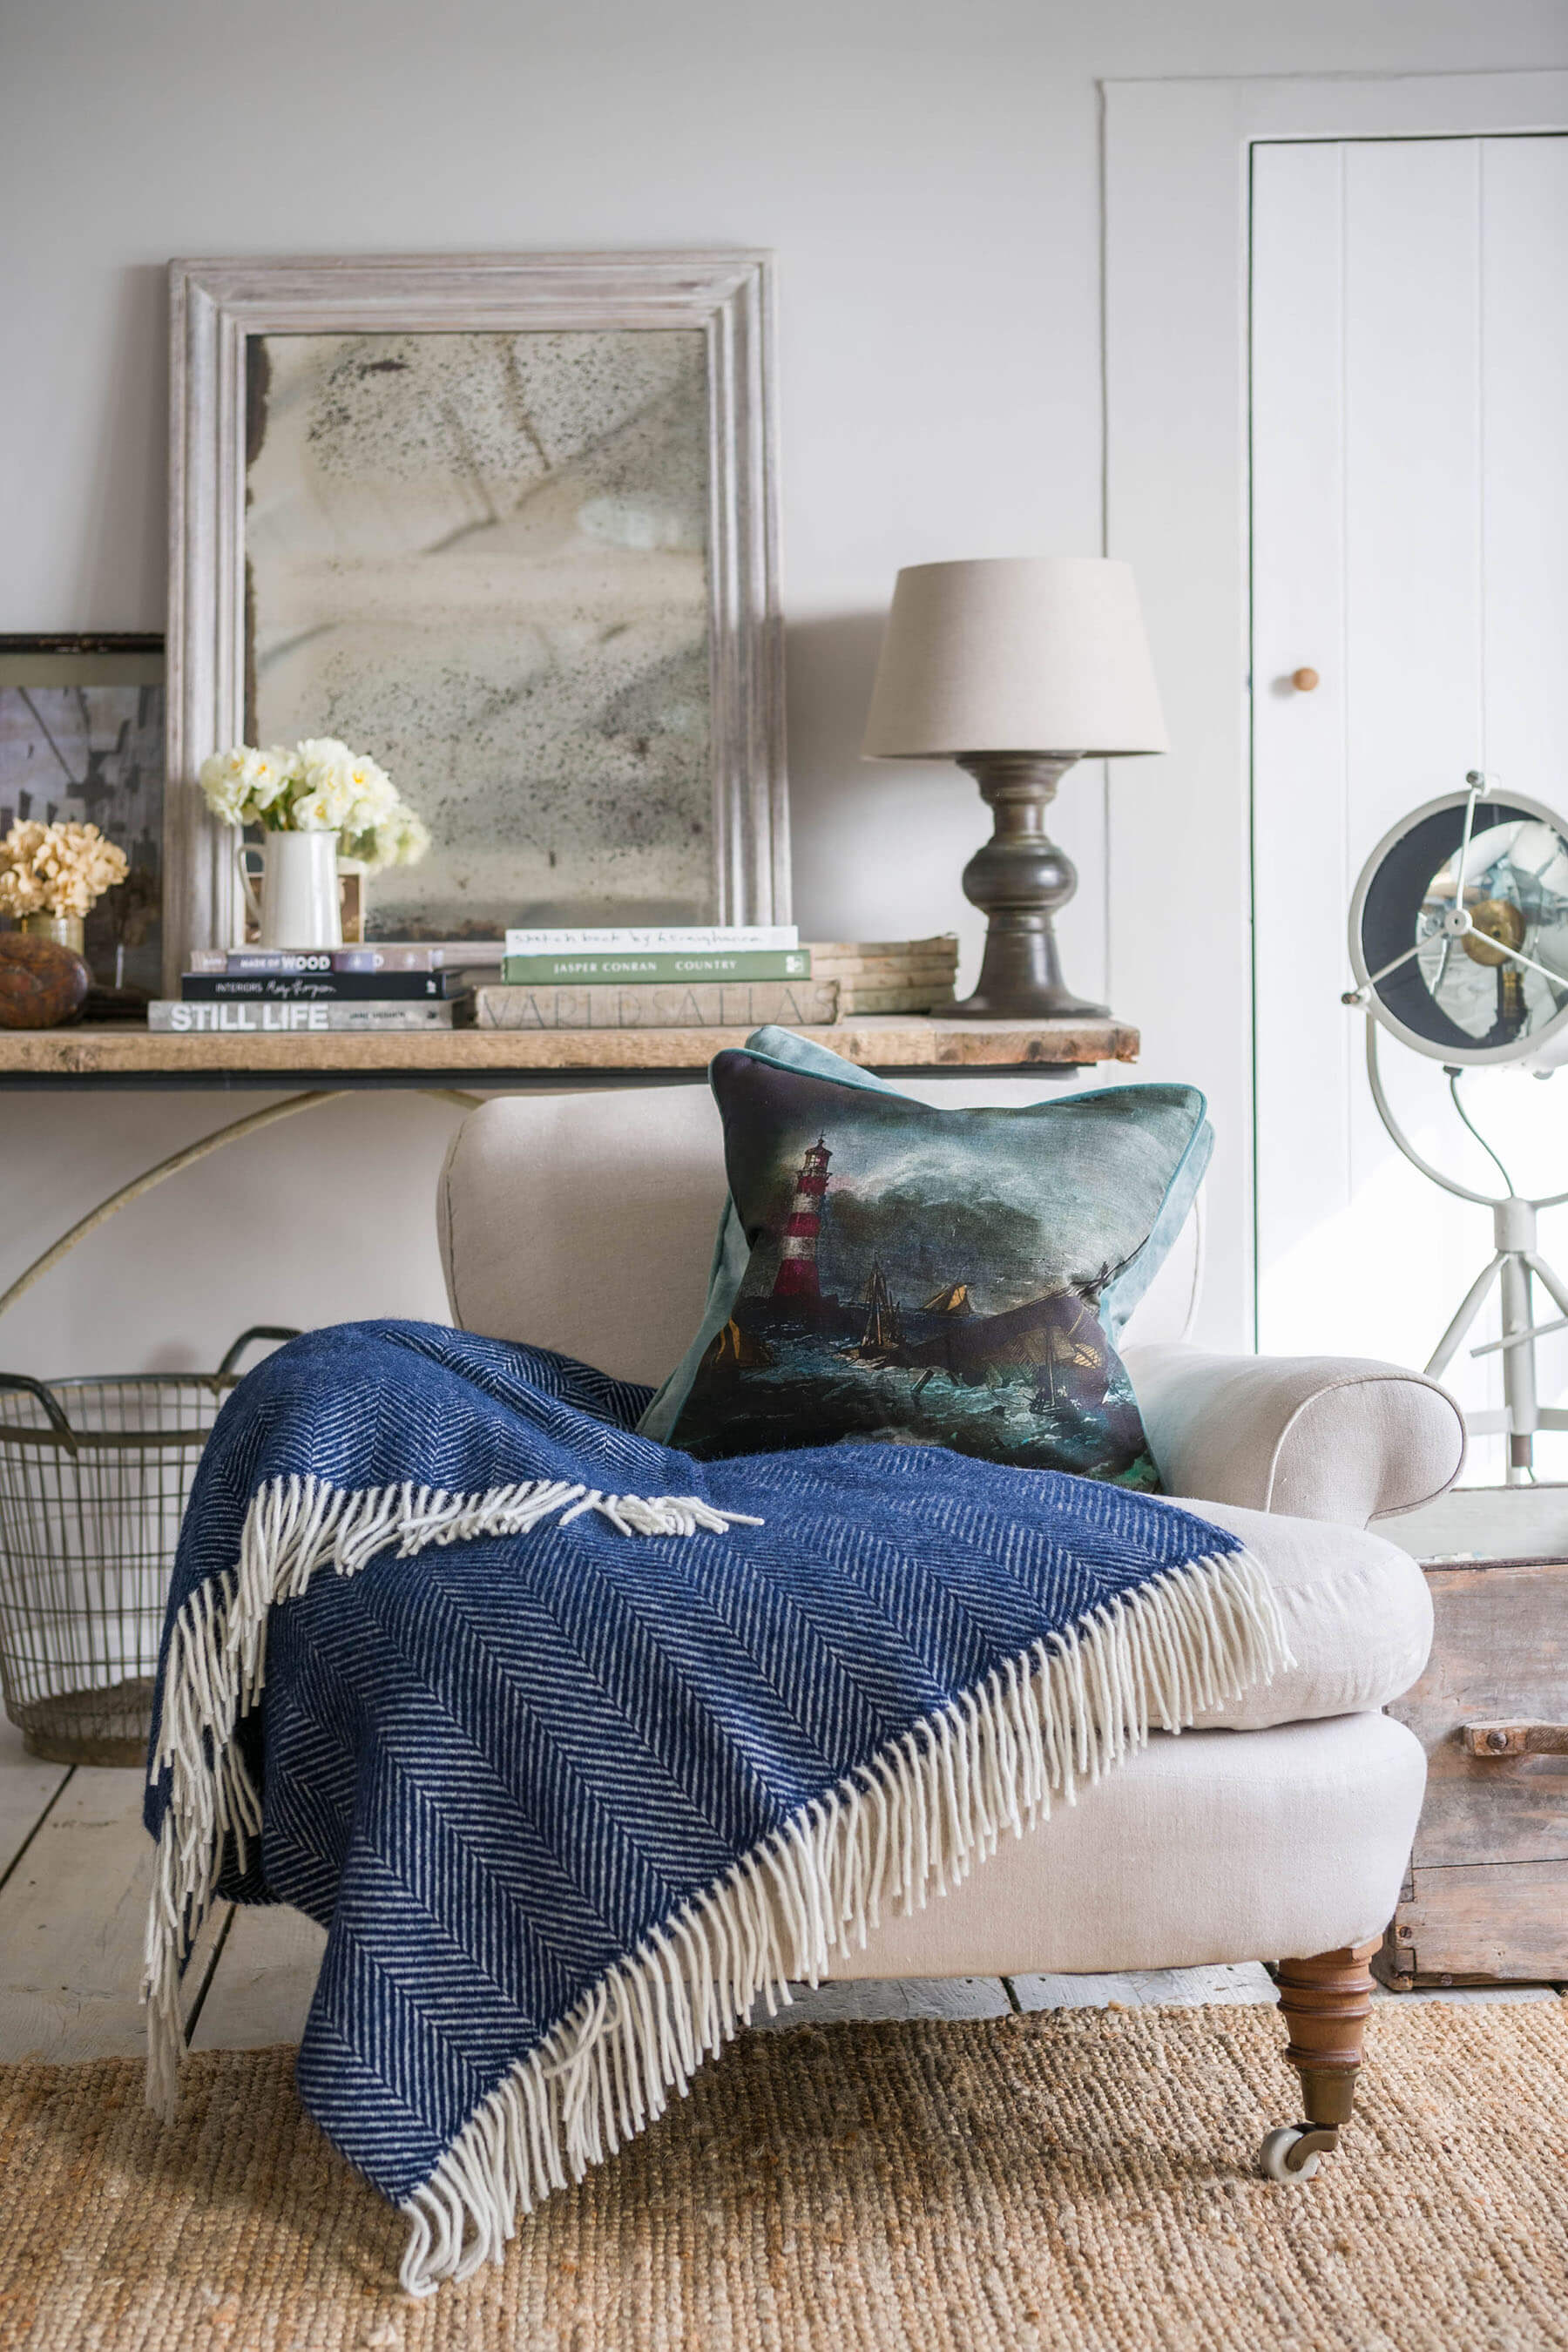 Lighthouse cushion placed on a cream chair over a navy throw.In the background is a table with books and distressed mirror and flowers on.Behind the chair is a door with a upstanding fan in front of it.